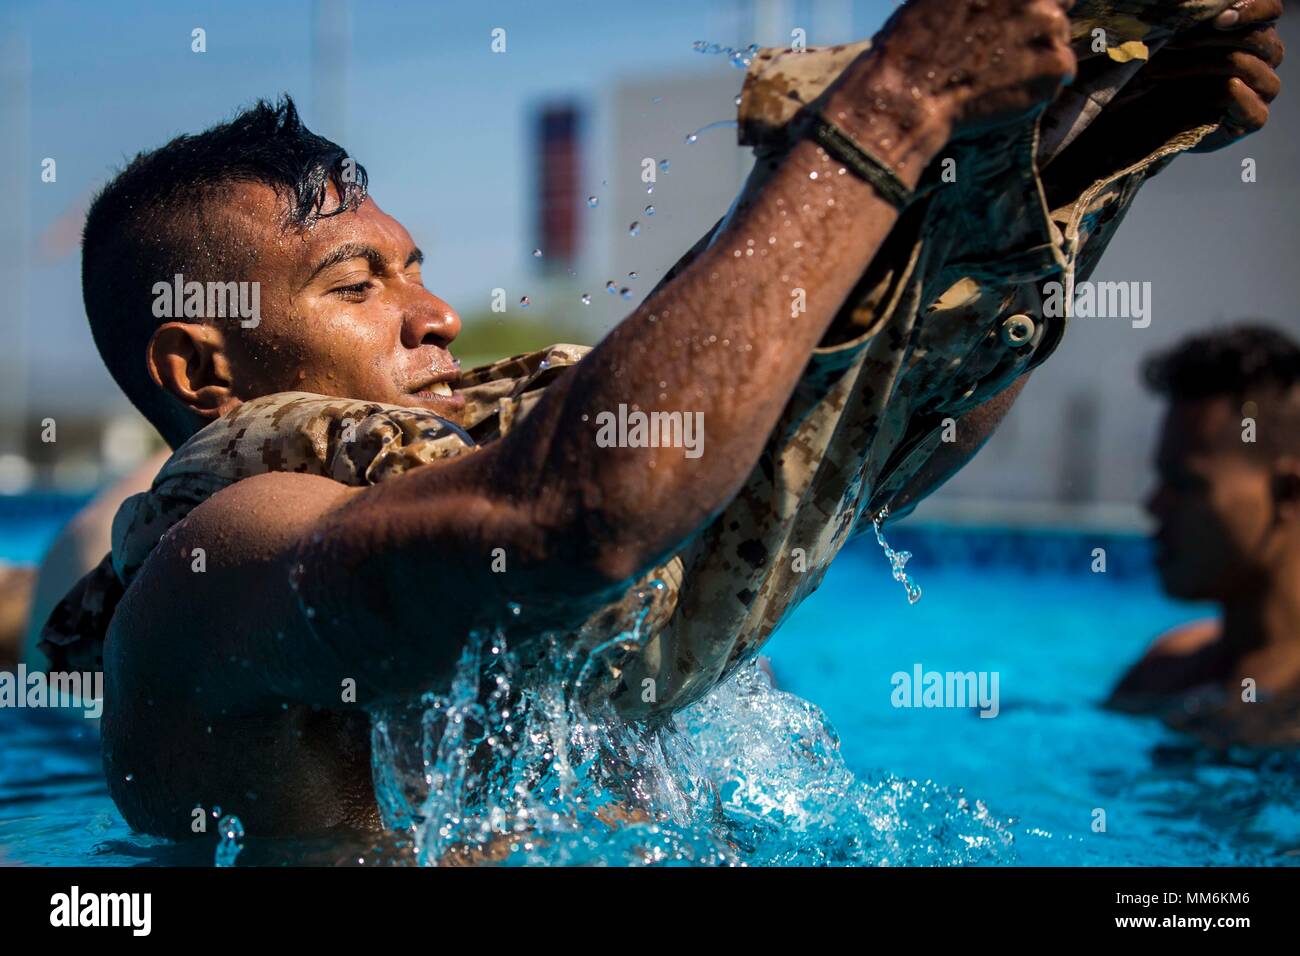 A member of the Falantil Forca de Defensa Timor Leste inflates a pair of trousers during Water Survival Training during Exercise Crocodilo as a part of Exercise Koa Moana 17 in Metinaro, Timor Leste, Sept. 9, 2017. Koa Moana 17 is designed to improve interoperability with our partners, enhance military-to-military relations, and expose the Marine Corps forces to different types of terrain for familiarity in the event of a natural disaster in the region.   (U.S. Marine Corps photo by MCIPAC Combat Camera Lance Cpl. Juan C. Bustos) Stock Photo